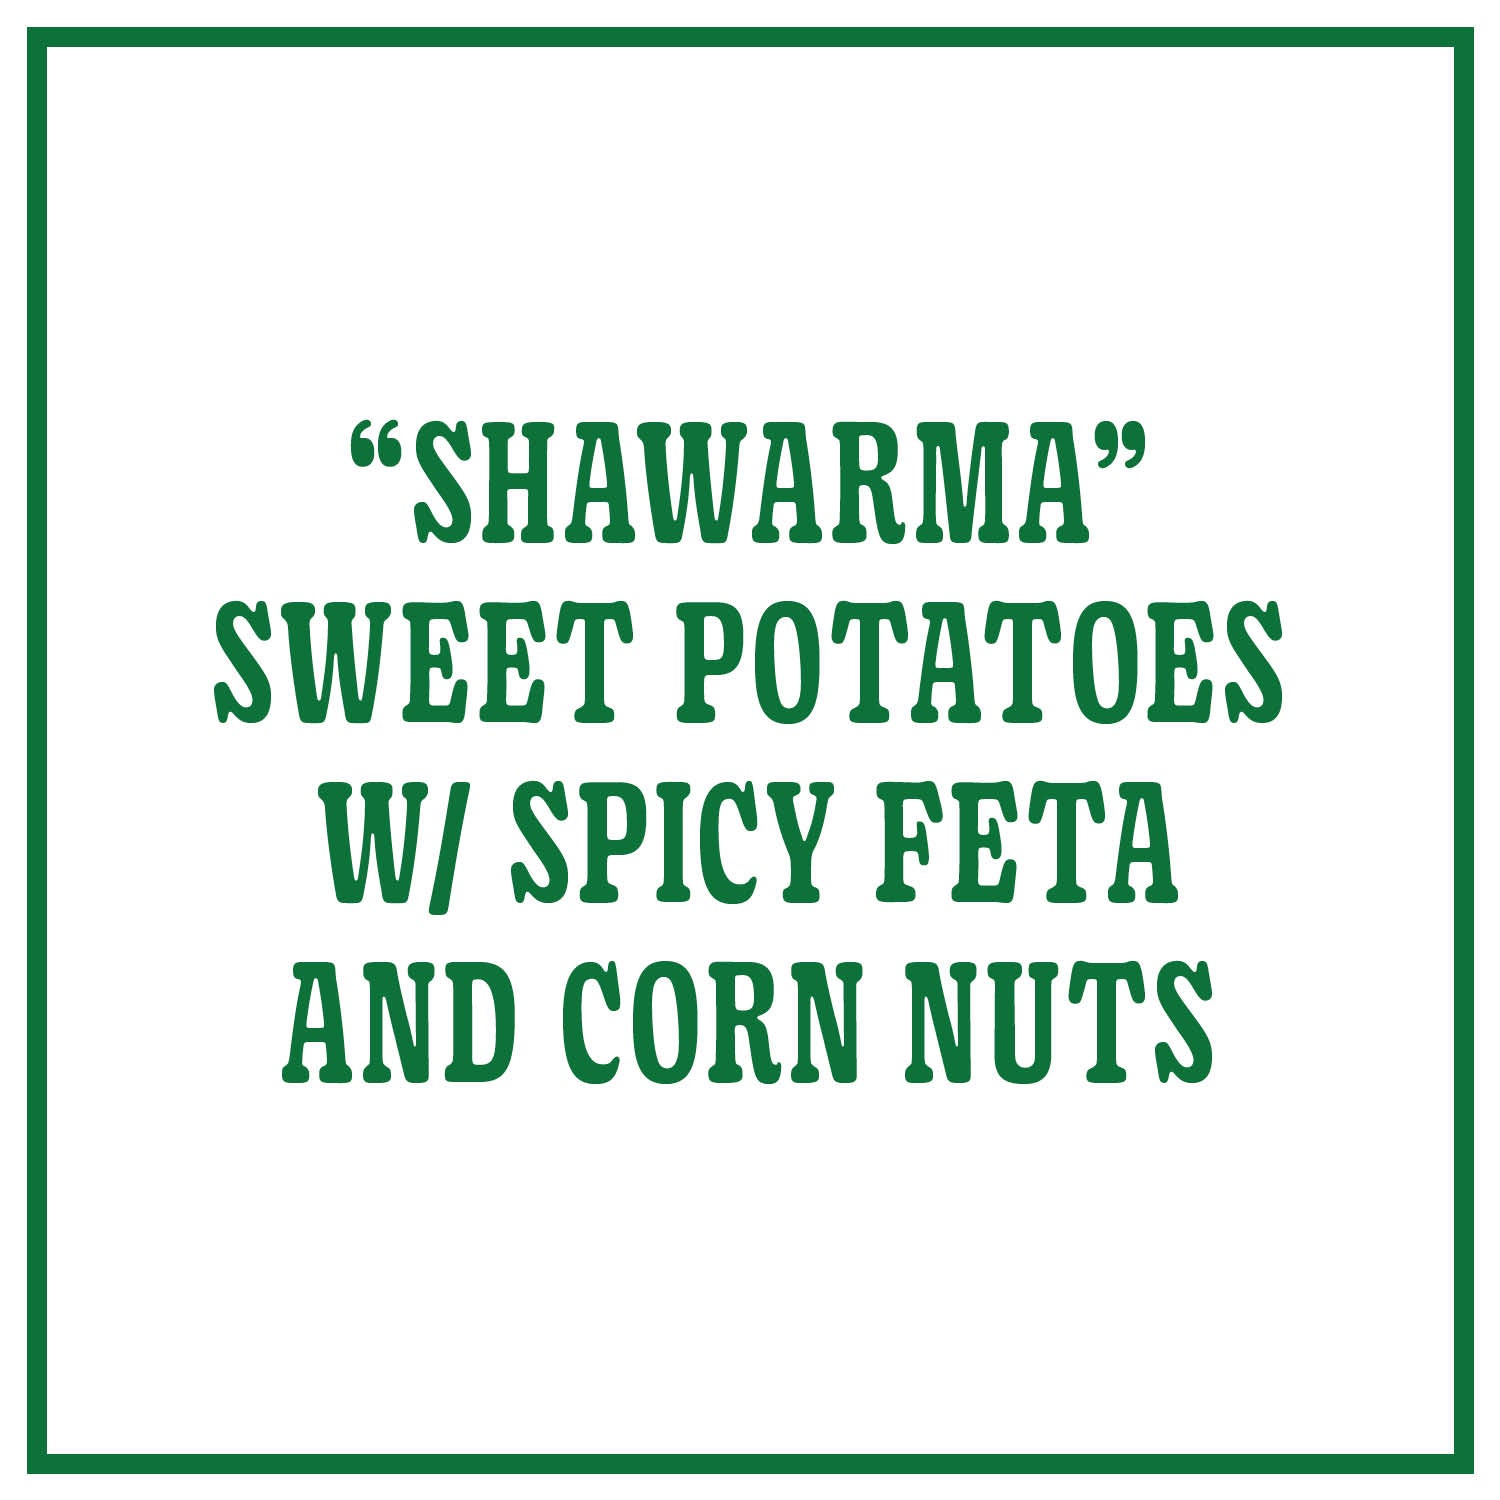 “Shawarma” Sweet Potatoes with Spicy Feta and Corn Nuts